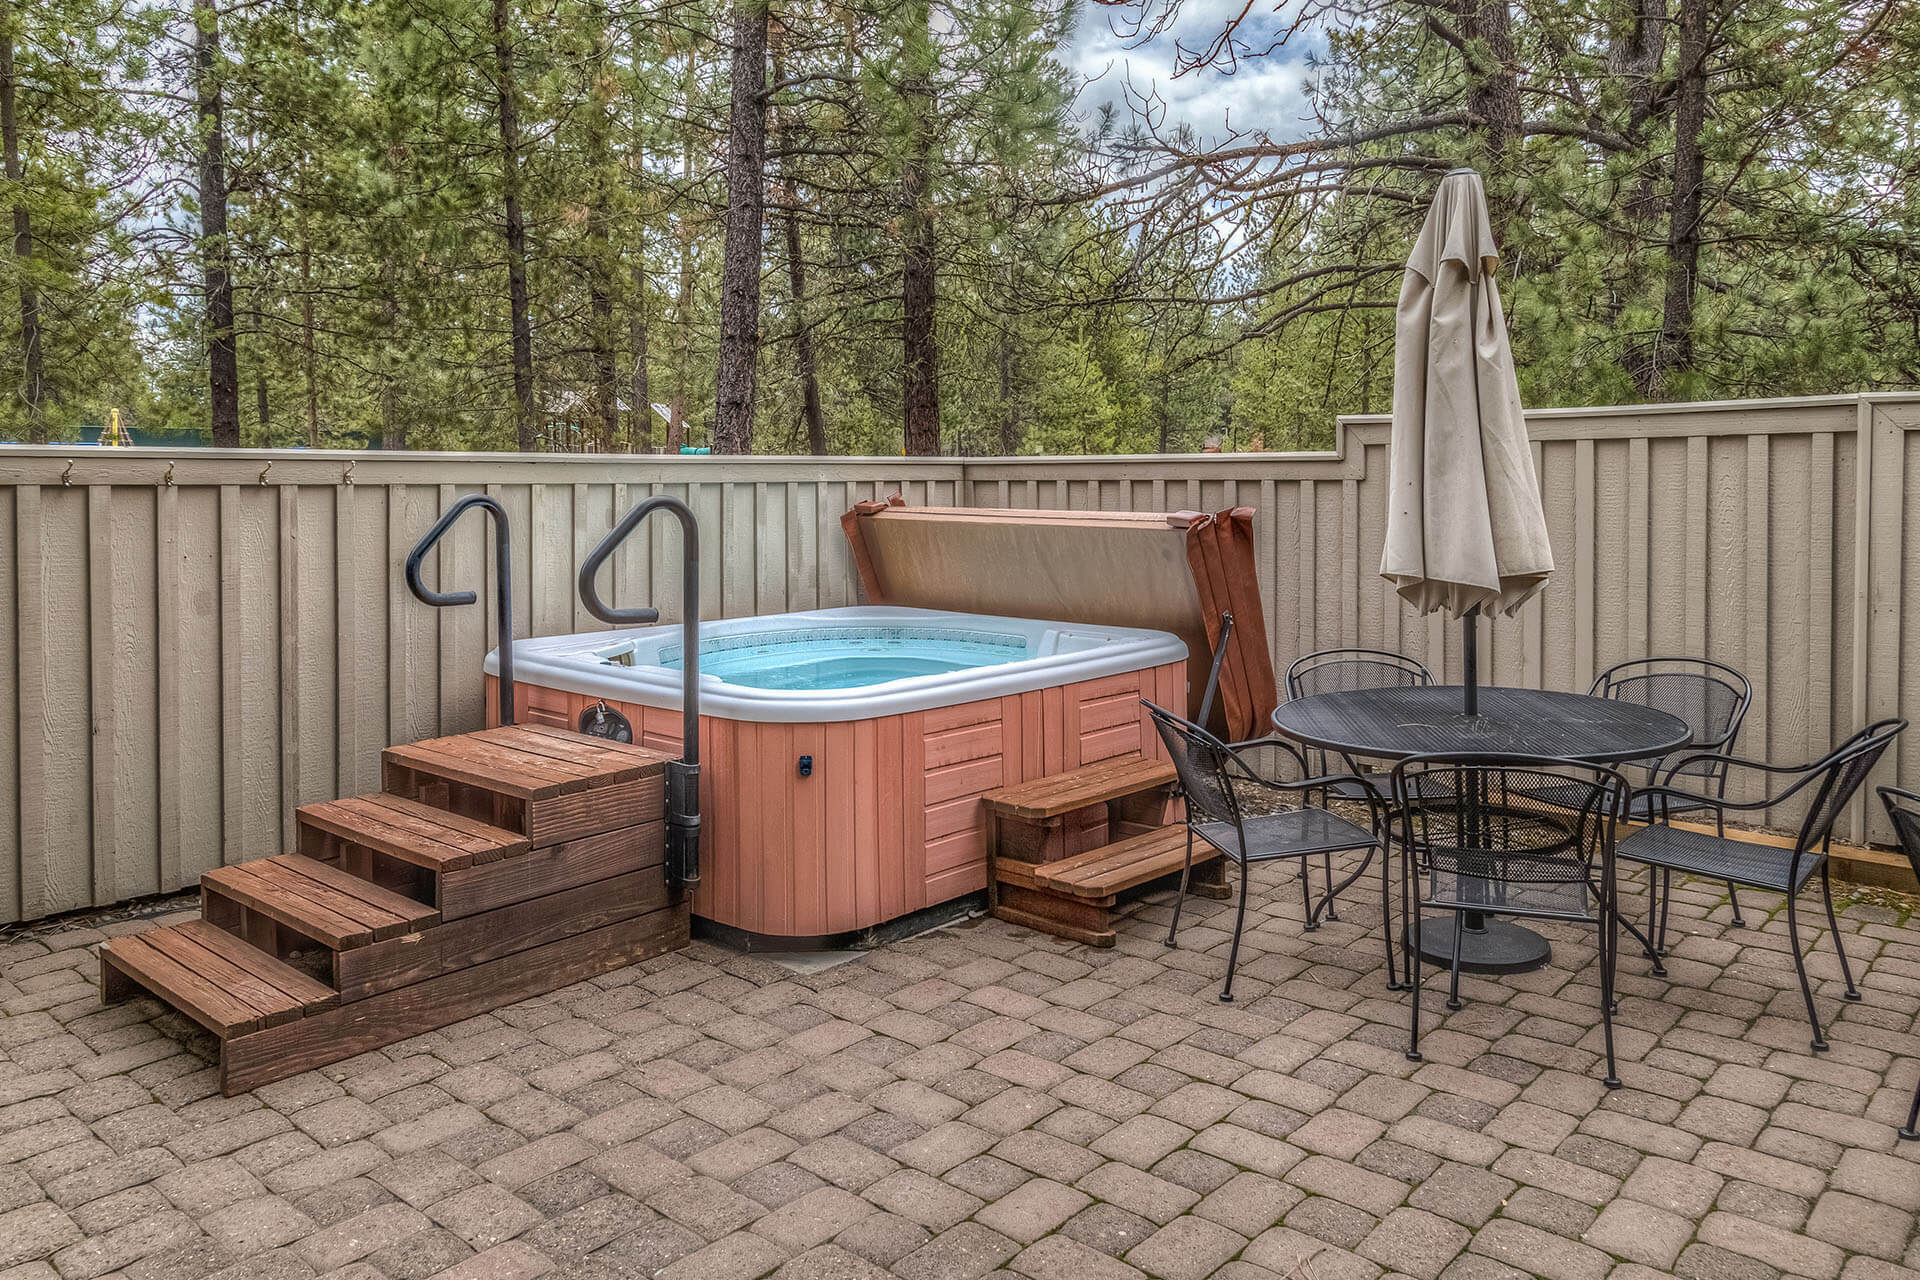 Is it necessary for a hot tub to have a cover?